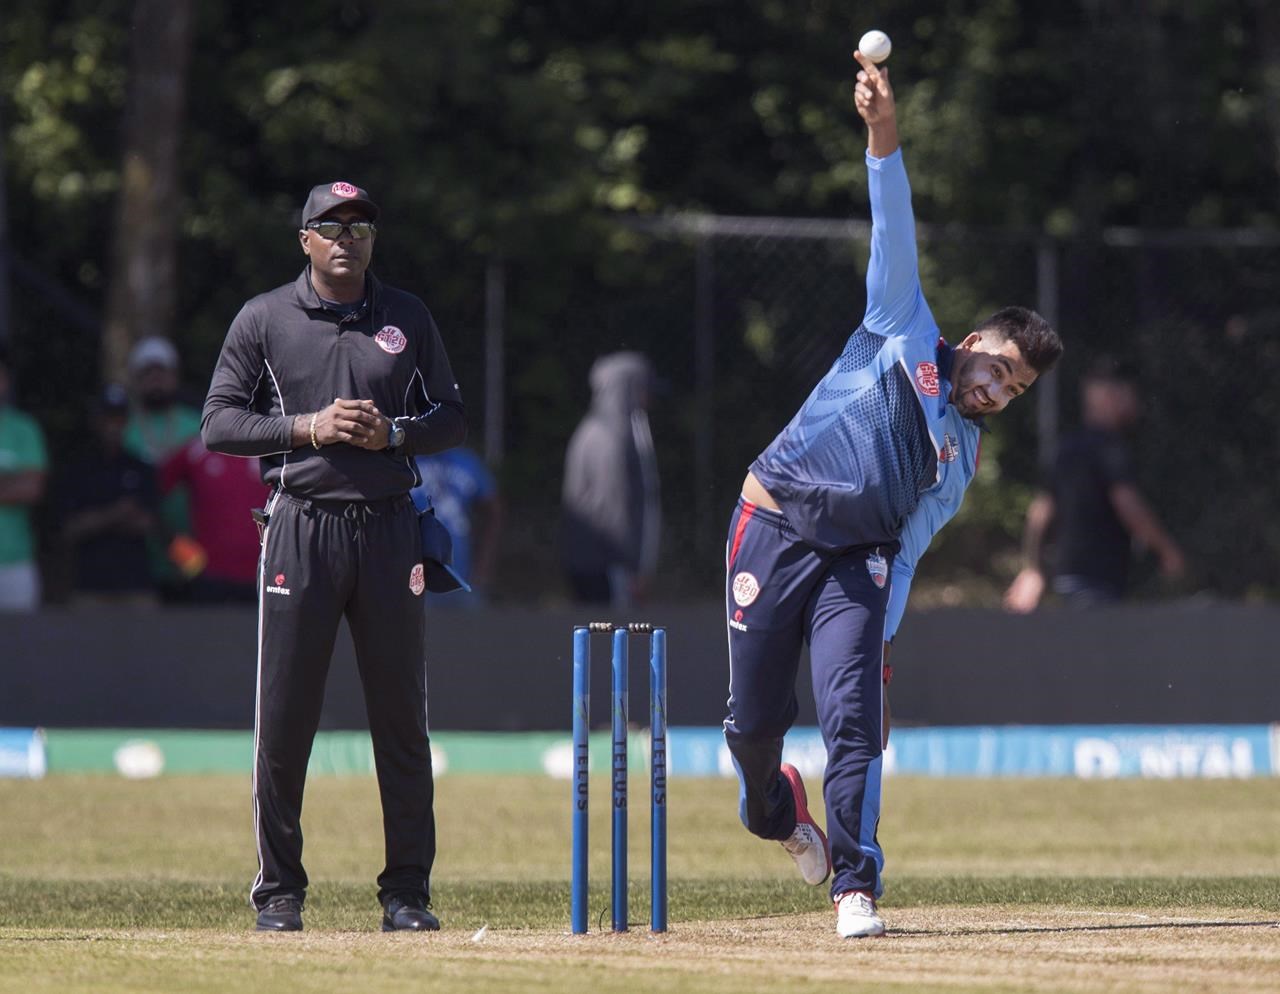 Canada cricketers defeat Bermuda to qualify for ICC T20 World Cup